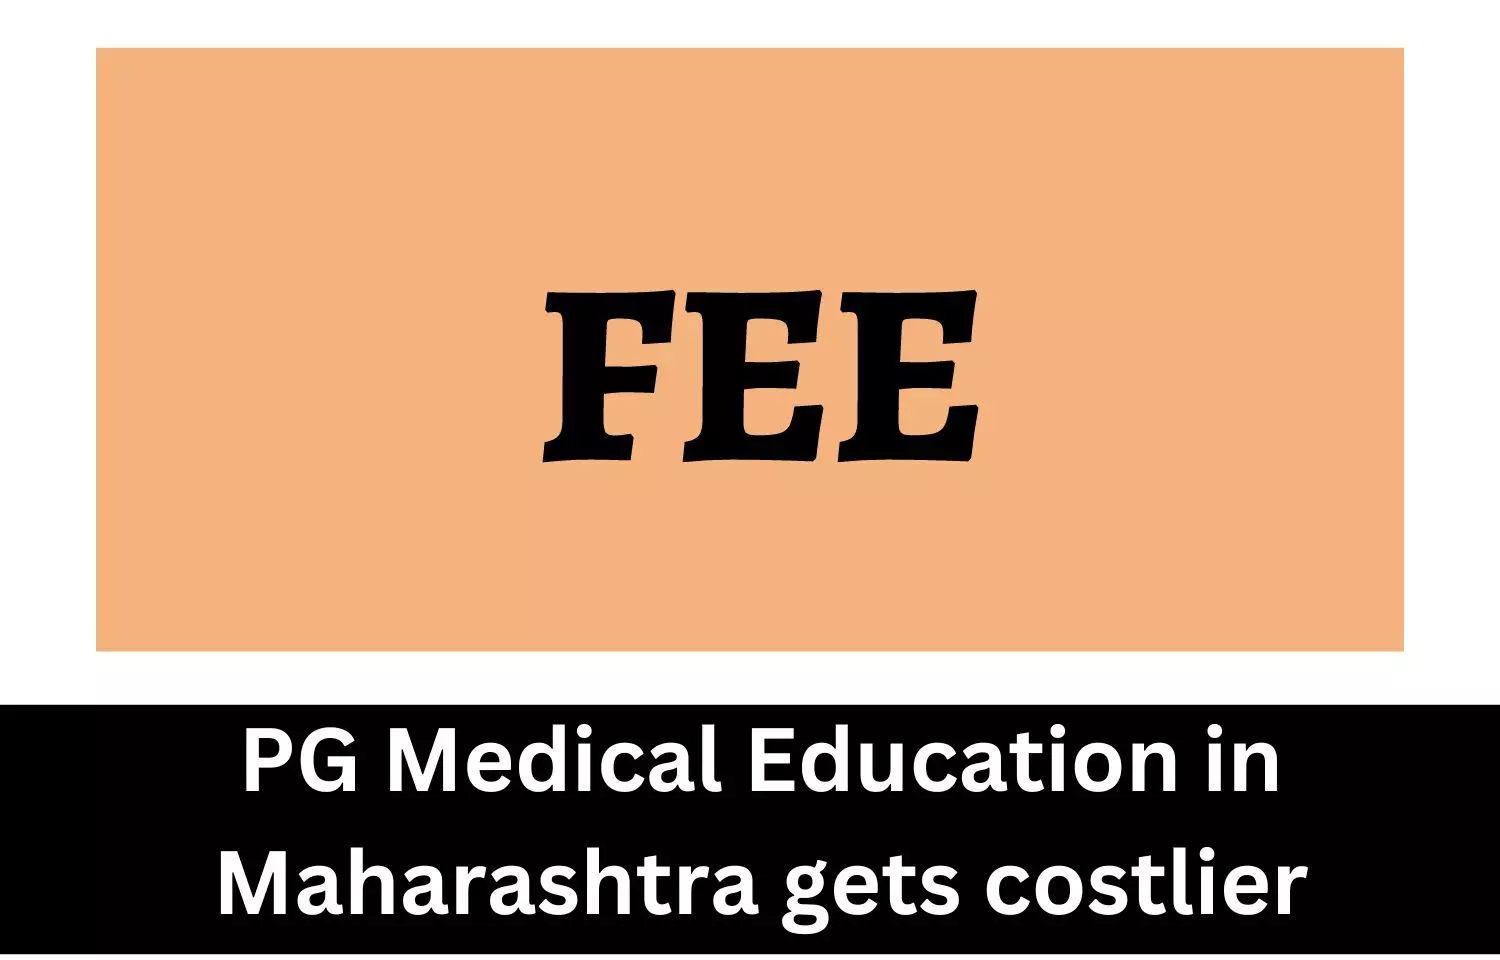 PG medical education in Maharashtra gets costlier amid confusion on NMC fee order